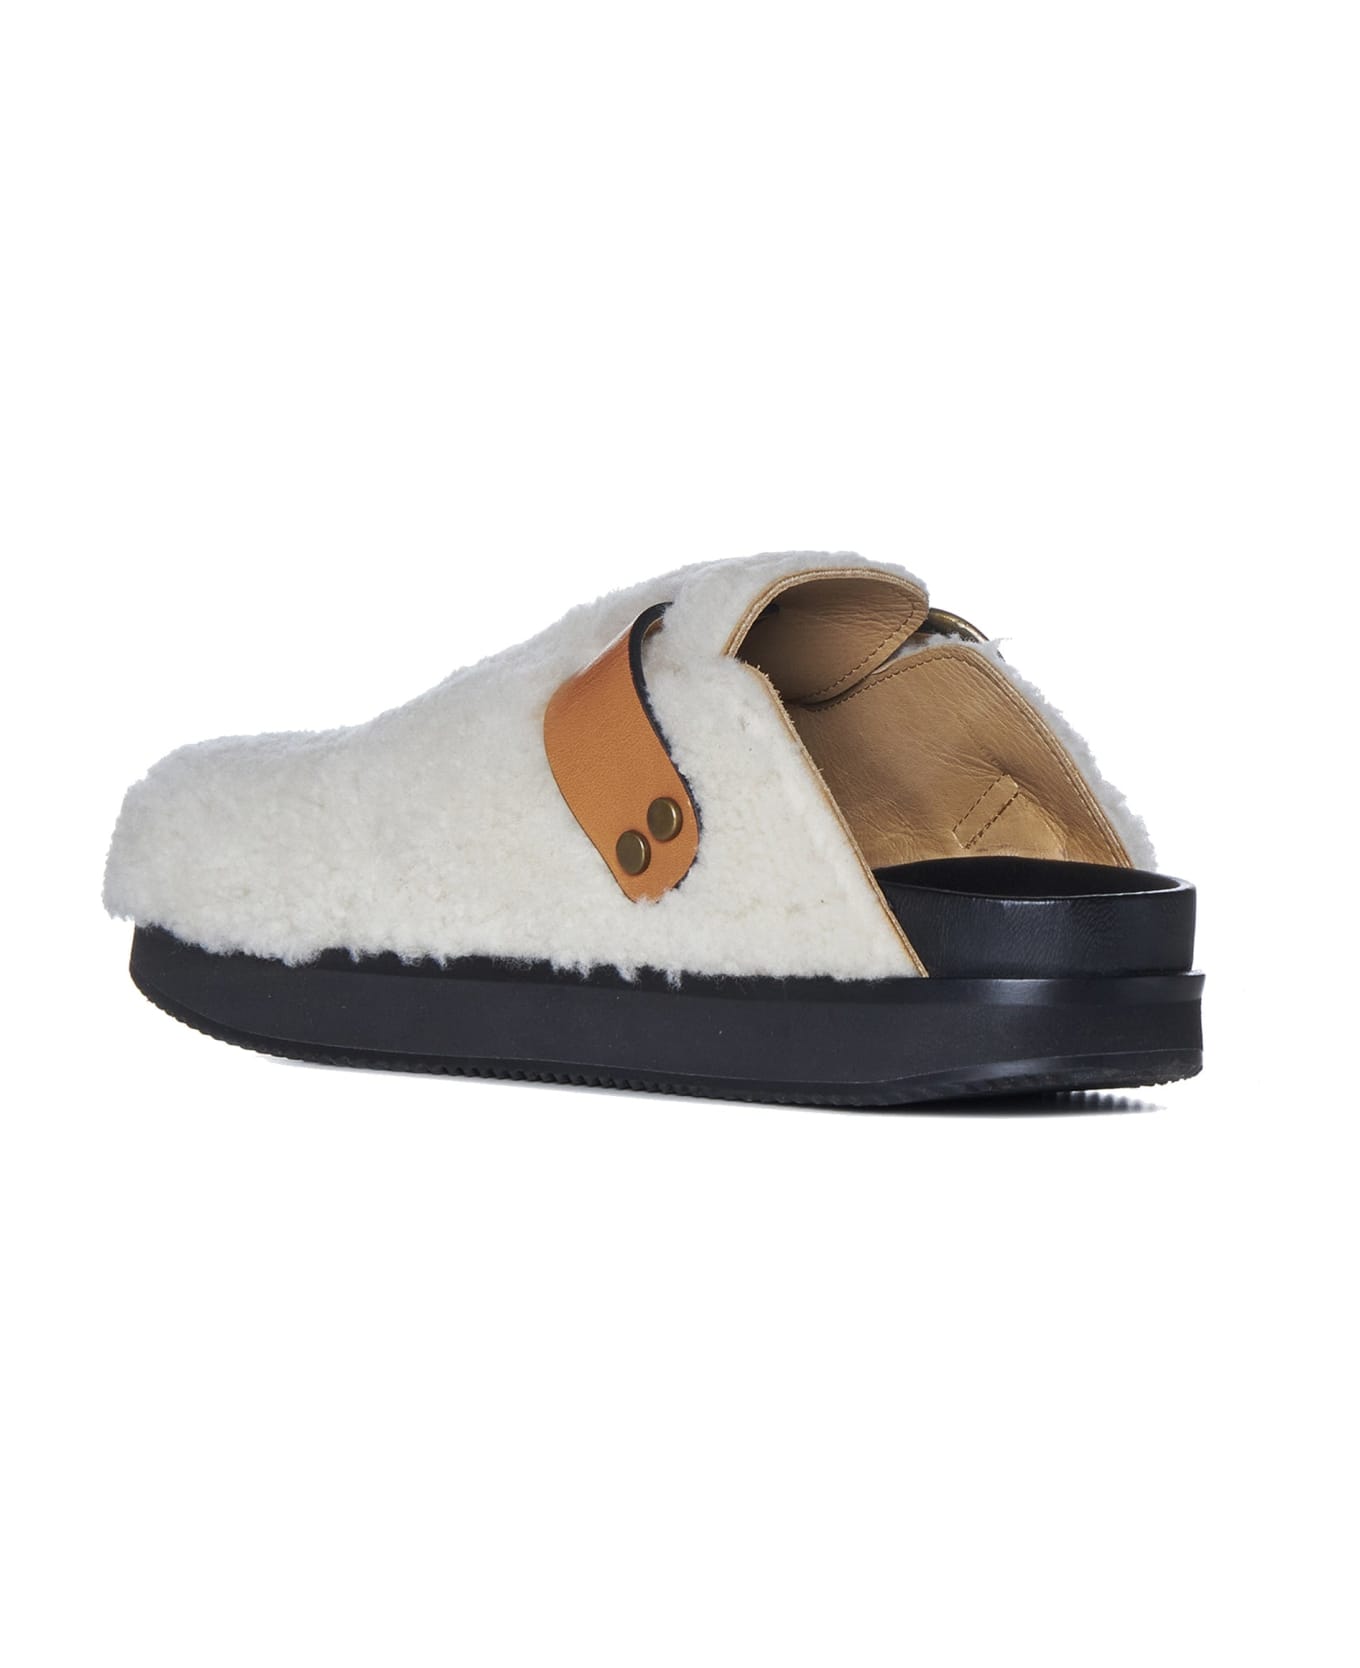 Isabel Marant Mirst Shearling Mules - Beige